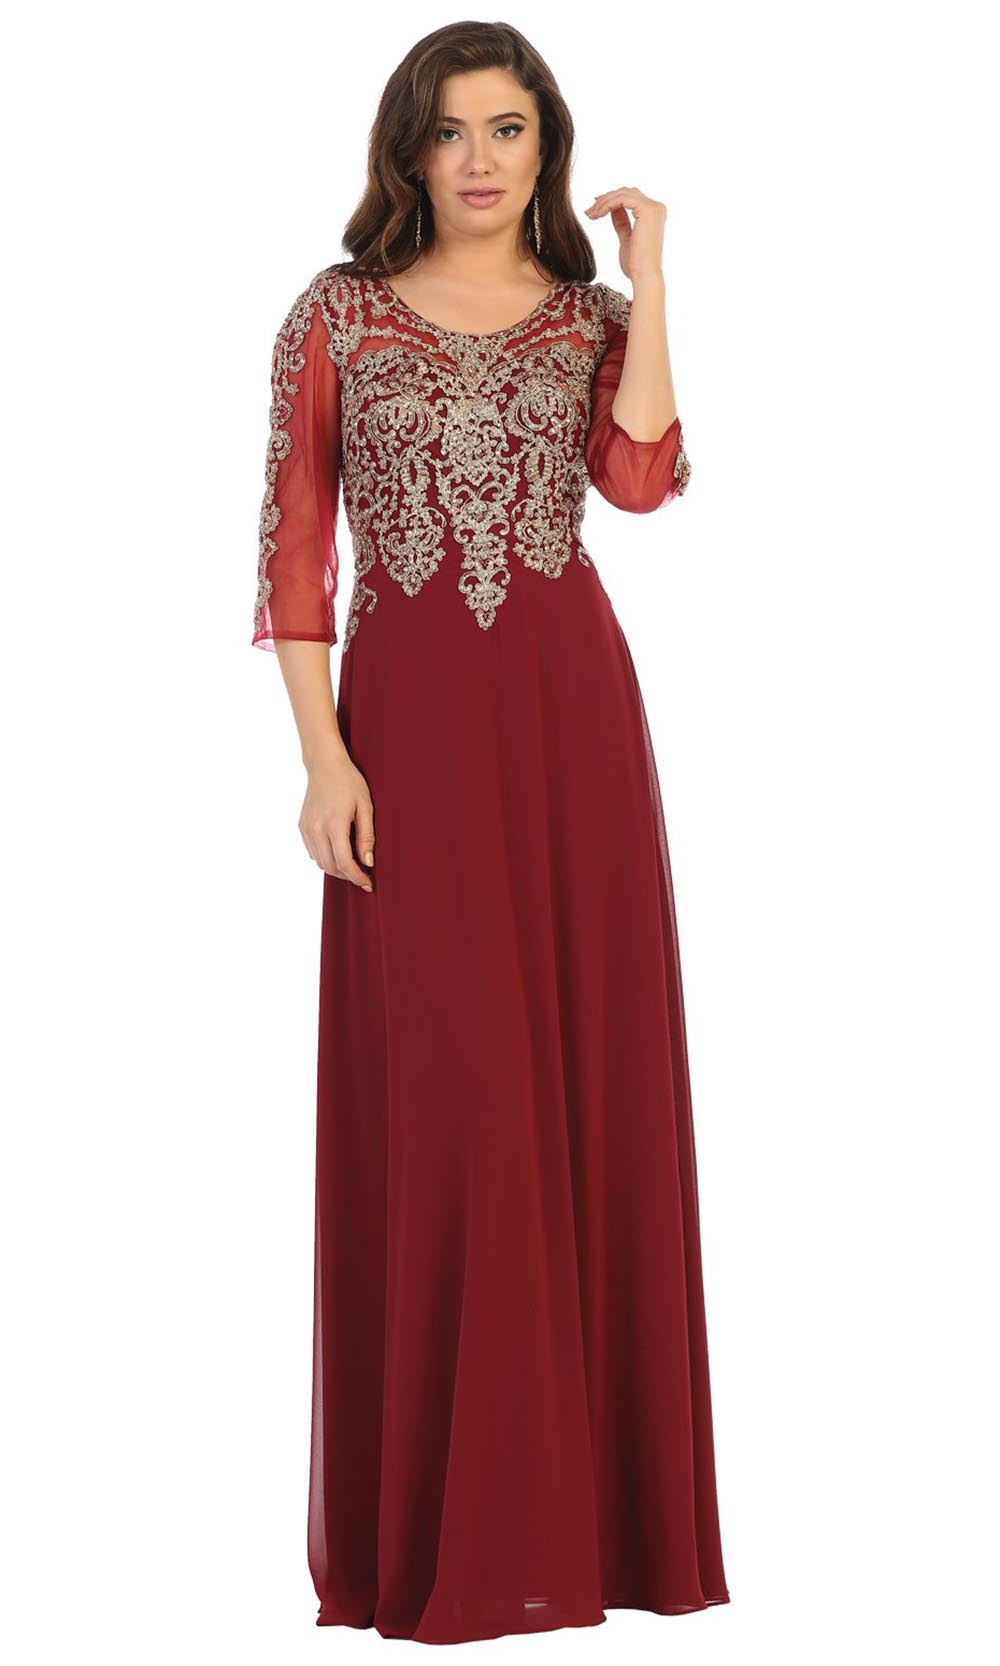 May Queen - MQ1670 Beaded Applique Formal Dress In Burgundy